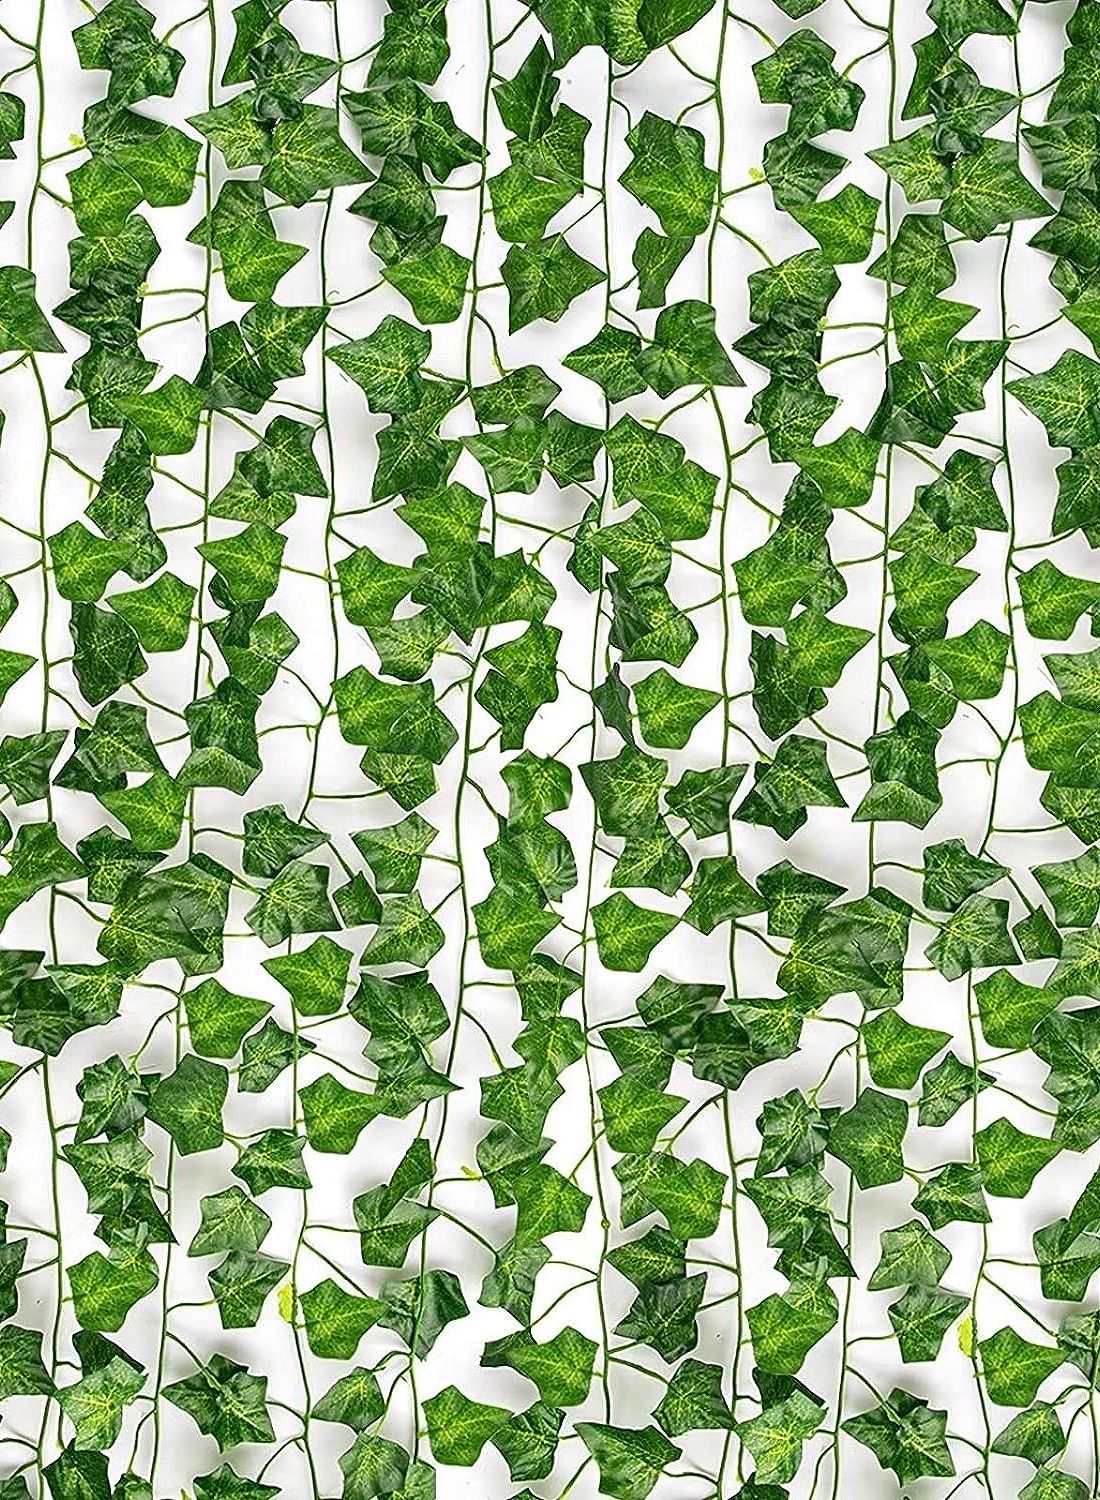 Ouddy 16 Strands 35m Fake Ivy Leaves Artificial Vines for Room Decor  Hanging Plants Greenery Garland for Home Kitchen Garden Office Wedding  Party Wall Decor by Ouddy - Shop Online for Homeware